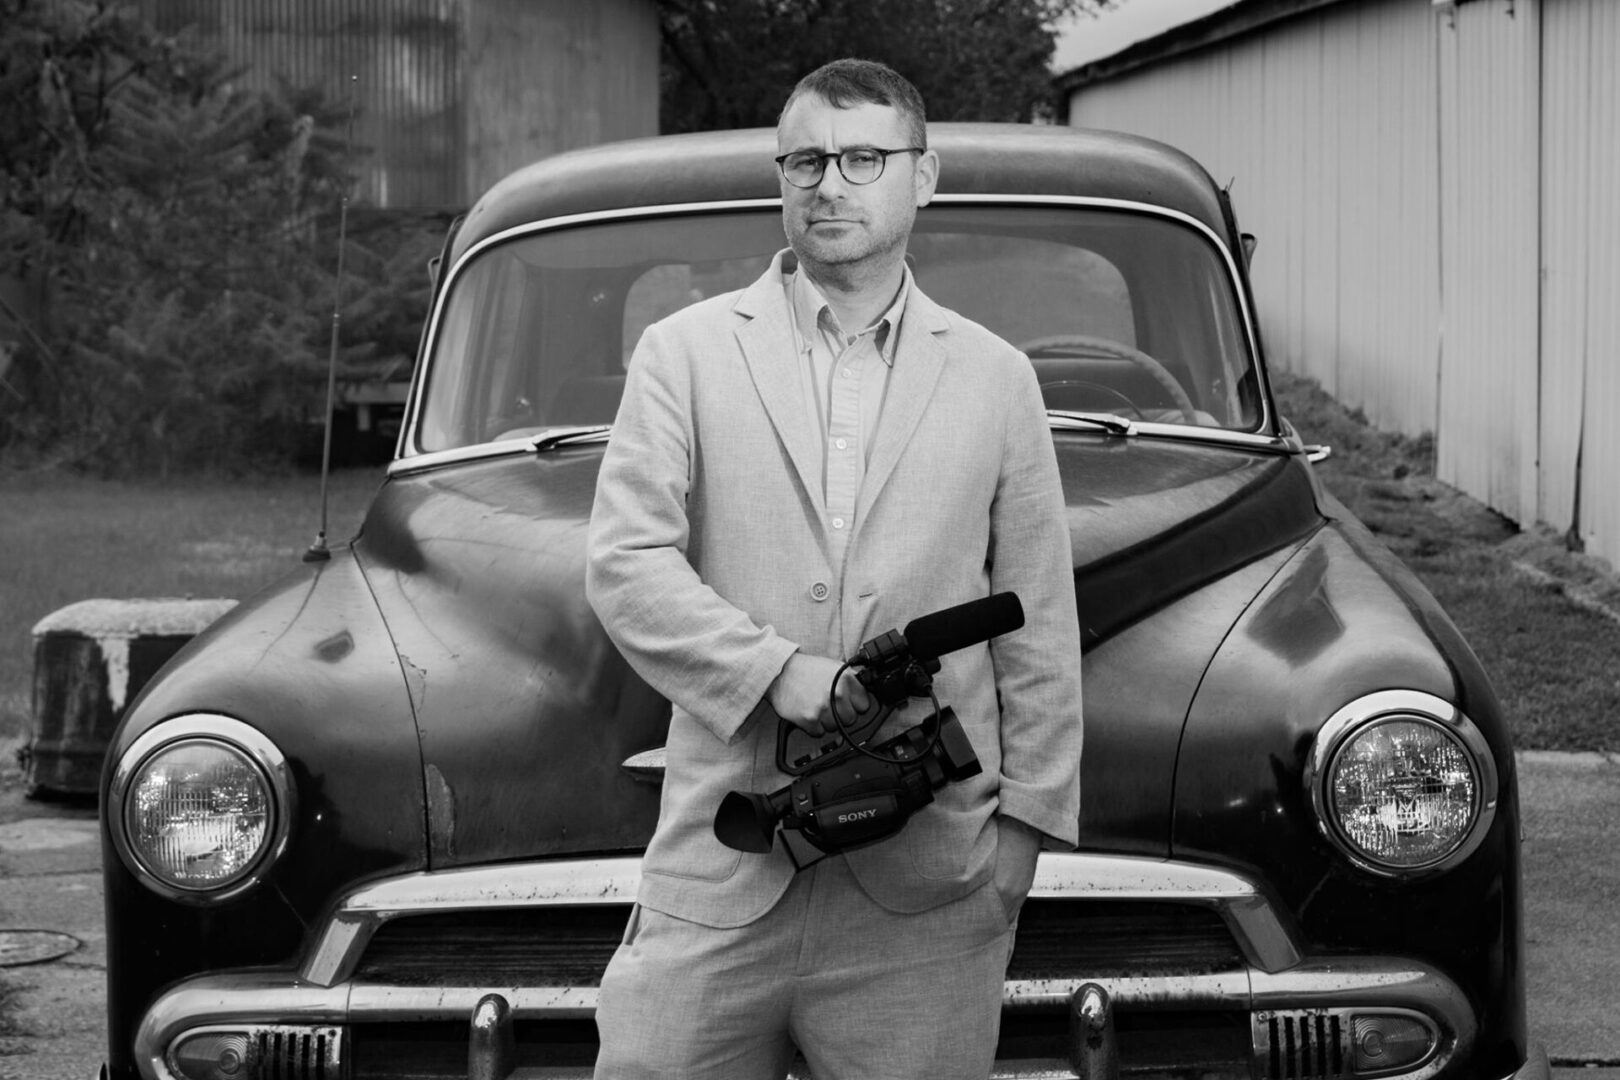 A man in suit and tie standing next to an old car.